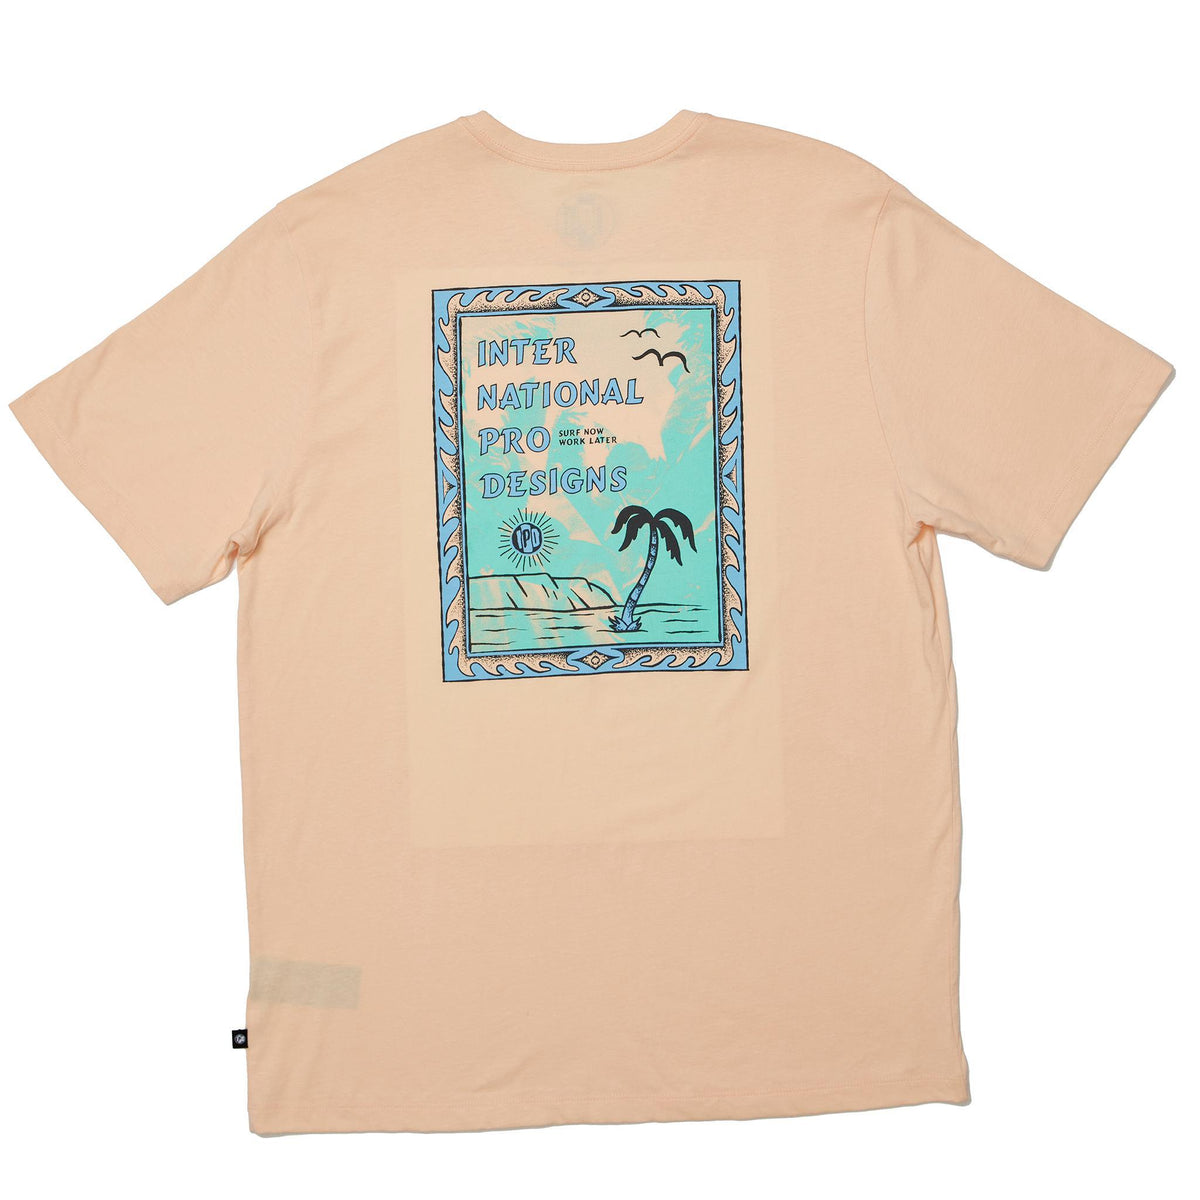 rear view of the mens framed super soft s/s tee in sherbert. showing the large rear graphic of stamp with international pro designs by a palm tree